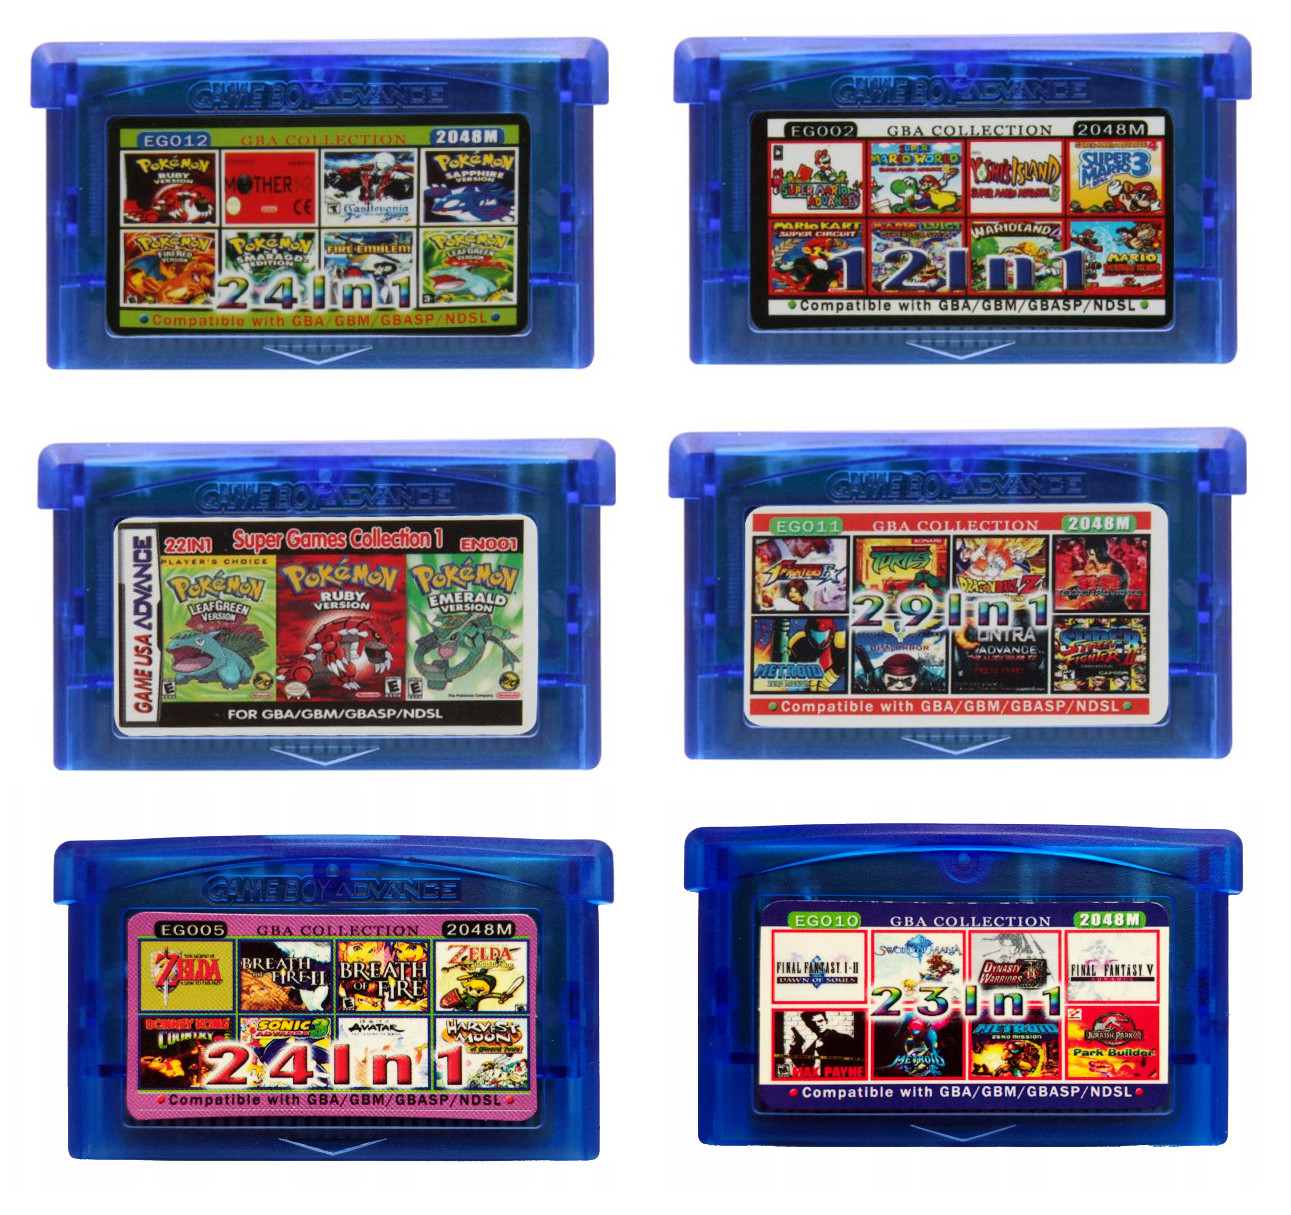 6 Compilation games for GBA - Final fantasy saga - Pokemon - Mario games serie - Zelda games. BuytoPlayGame - Buy Retro Games and Repro Games for nds snes gba gbc.